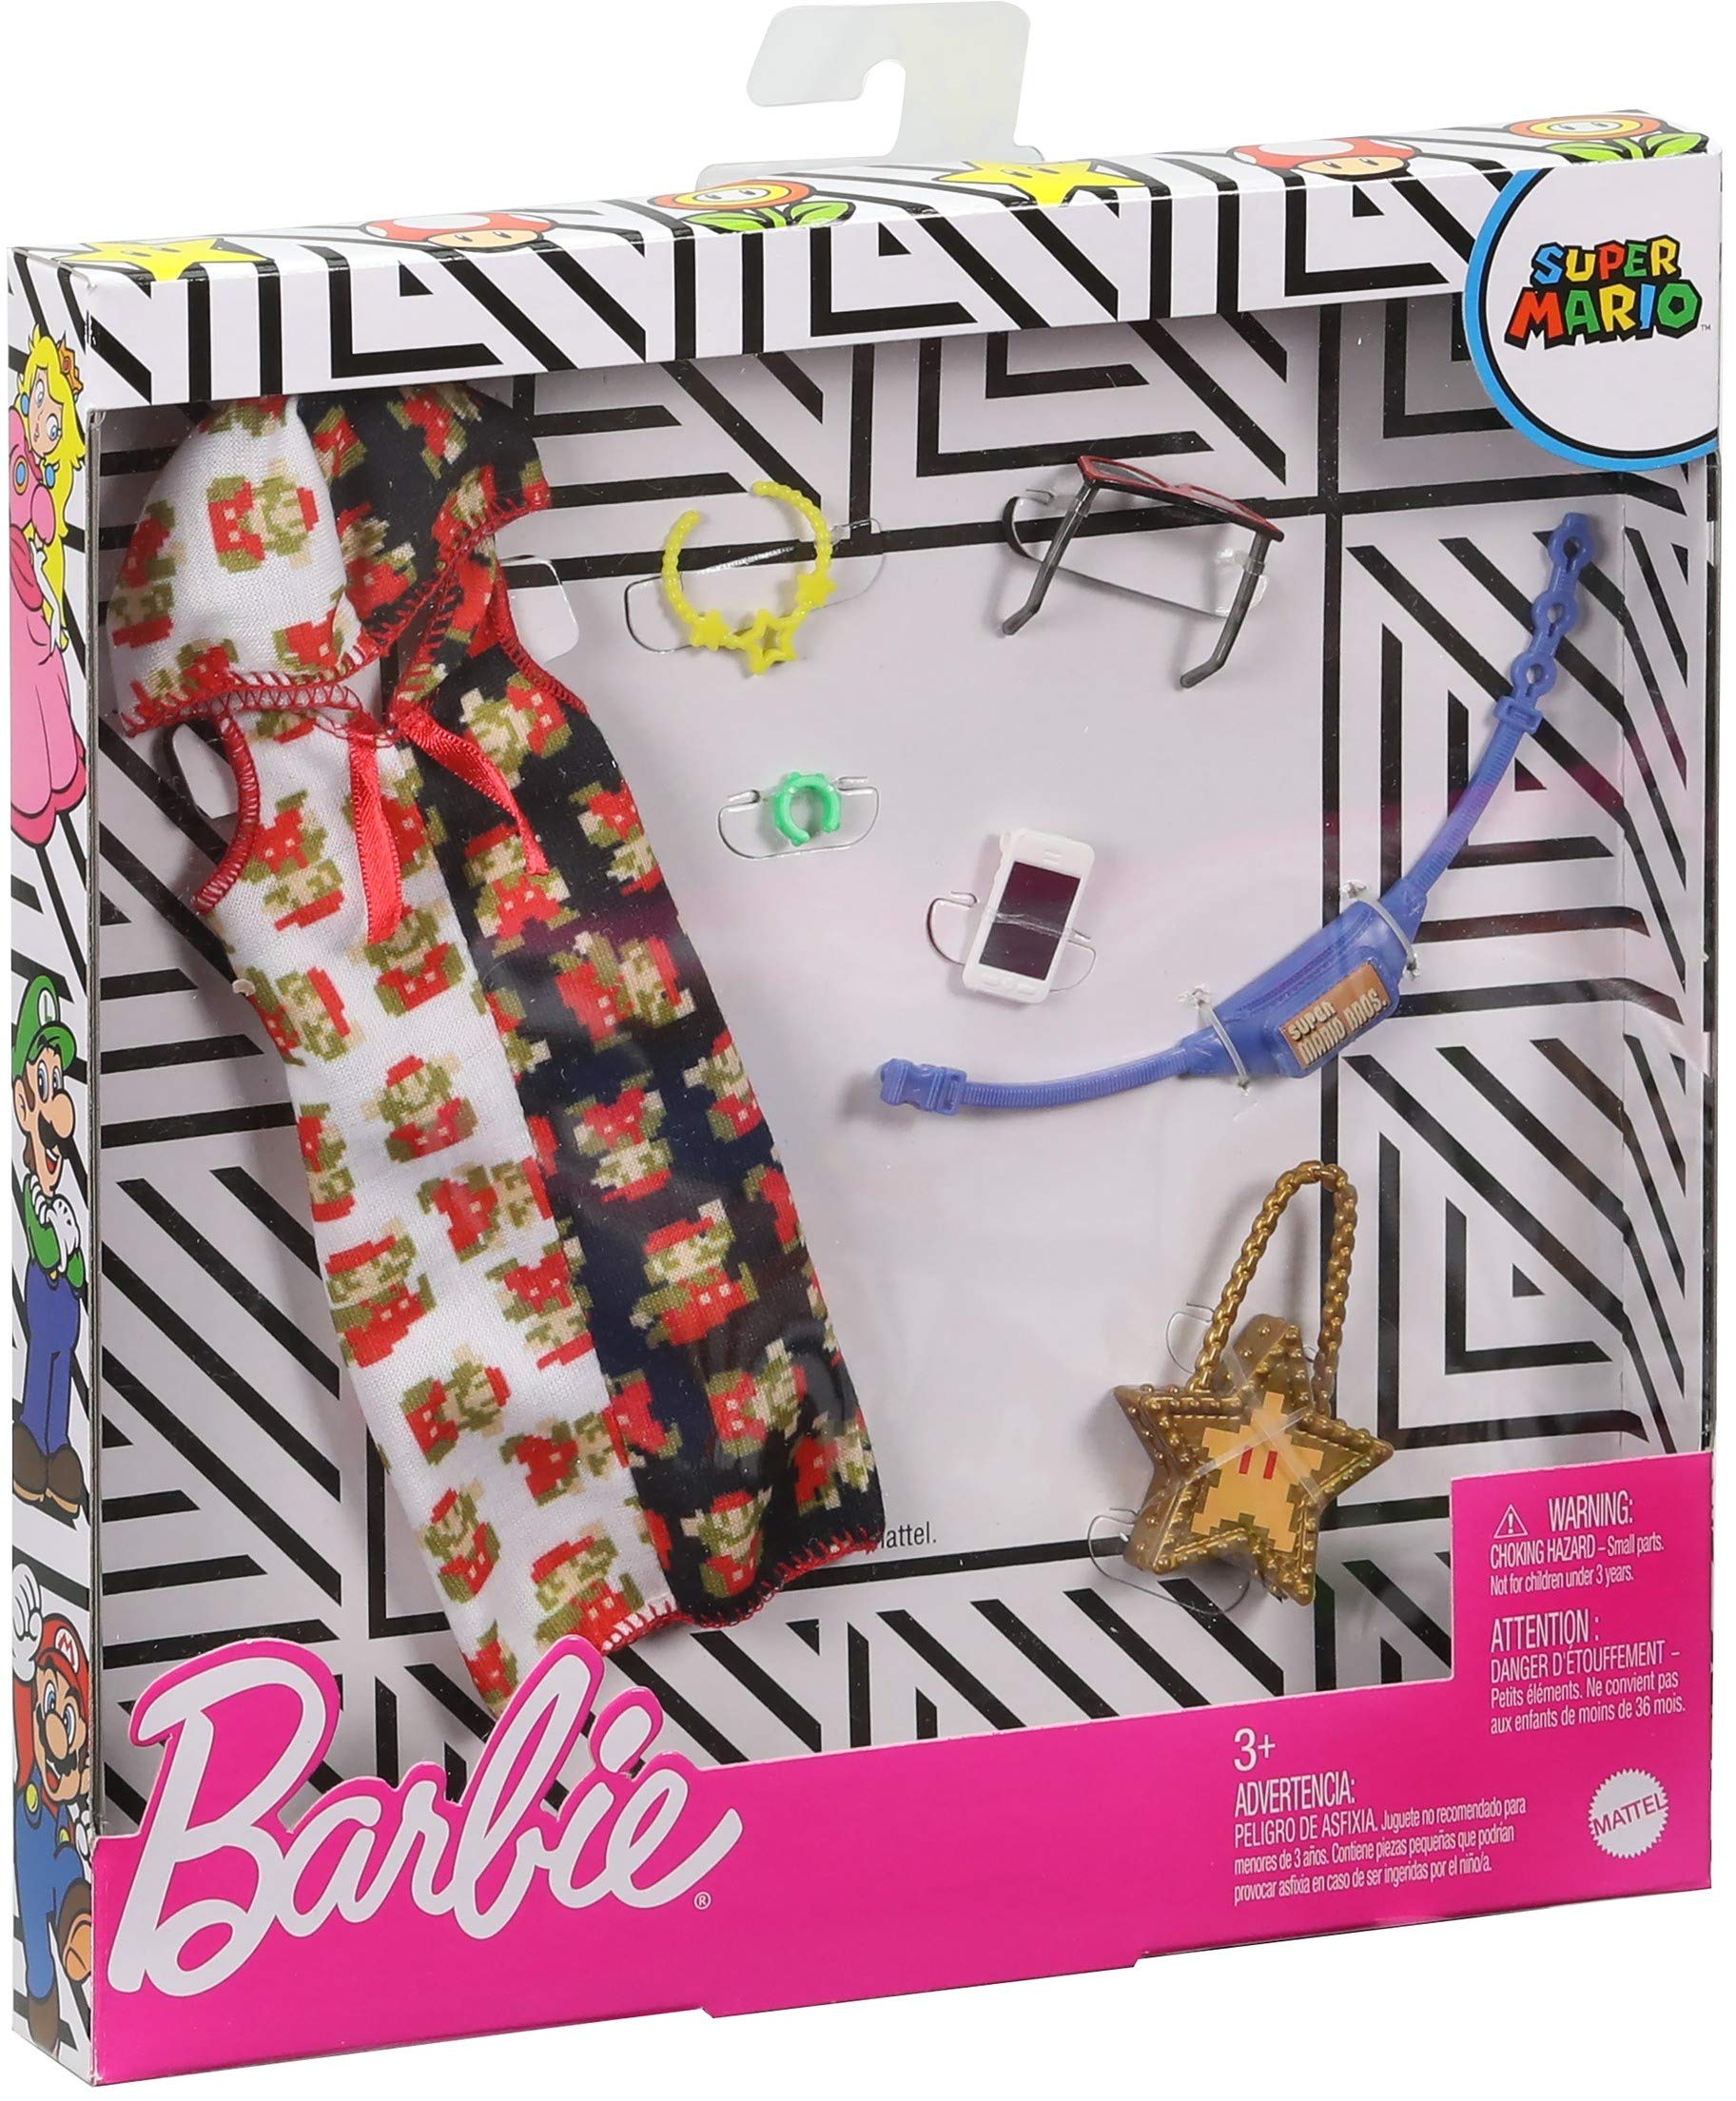 Barbie Storytelling Fashion Pack of Doll Clothes Inspired by Super Mario: Hoodie Dress & 6 Accessories for Barbie Dolls, Gift for 3 to 8 Year Olds